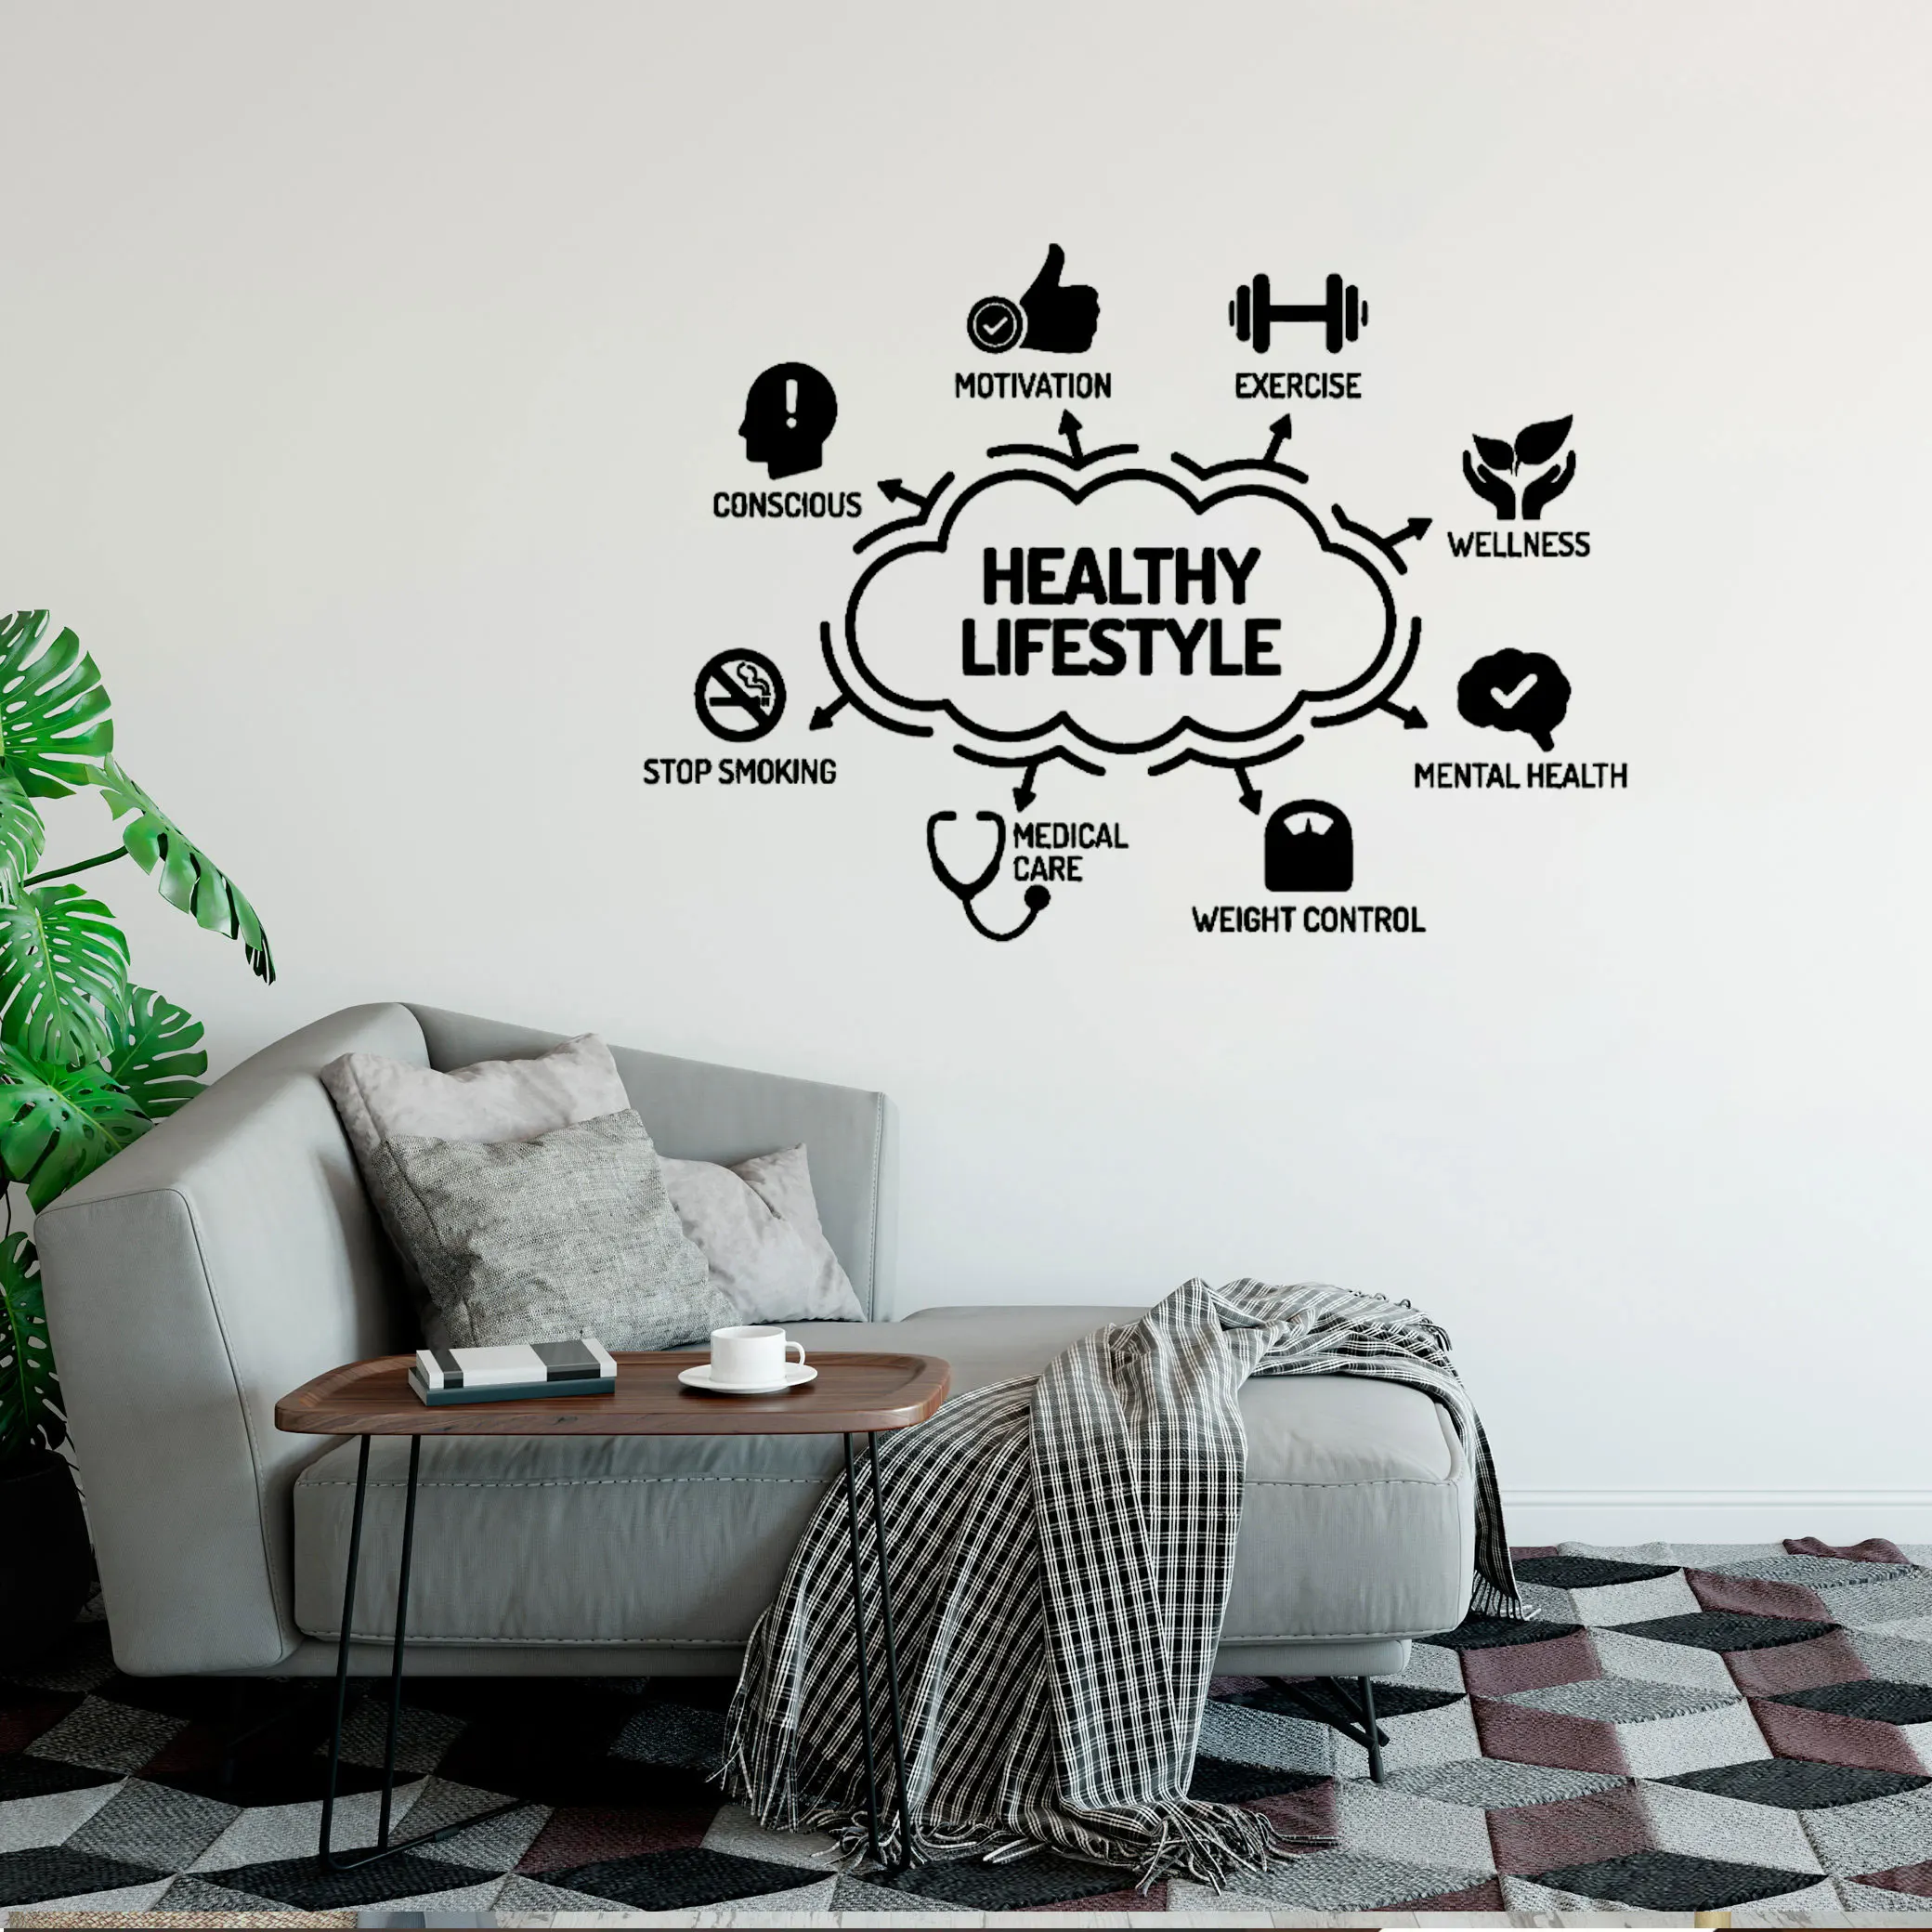 

Healthy Lifestyle Wall Decal Balance Sport Food Words Vinyl Window Stickers Home Decor for Bedroom Living Room Gym Mural DW7729